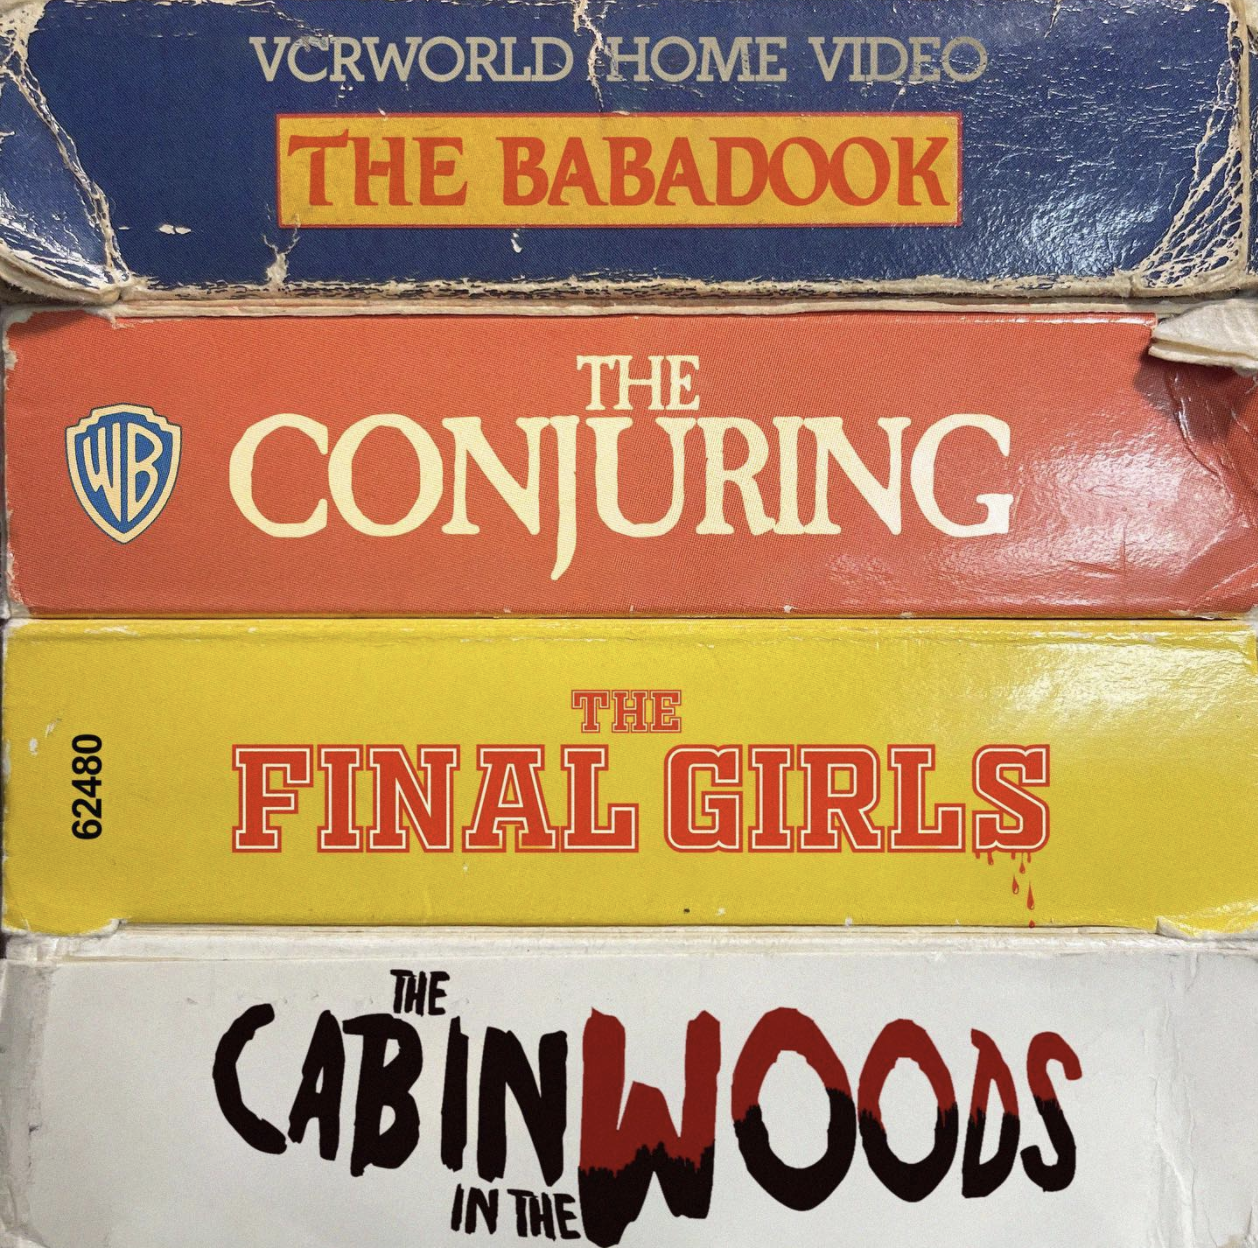 VHS tape edits - looney tunes - Vcrworld Home Video The Babadook The Un Conjring The Final Girls Cabinwoods In The